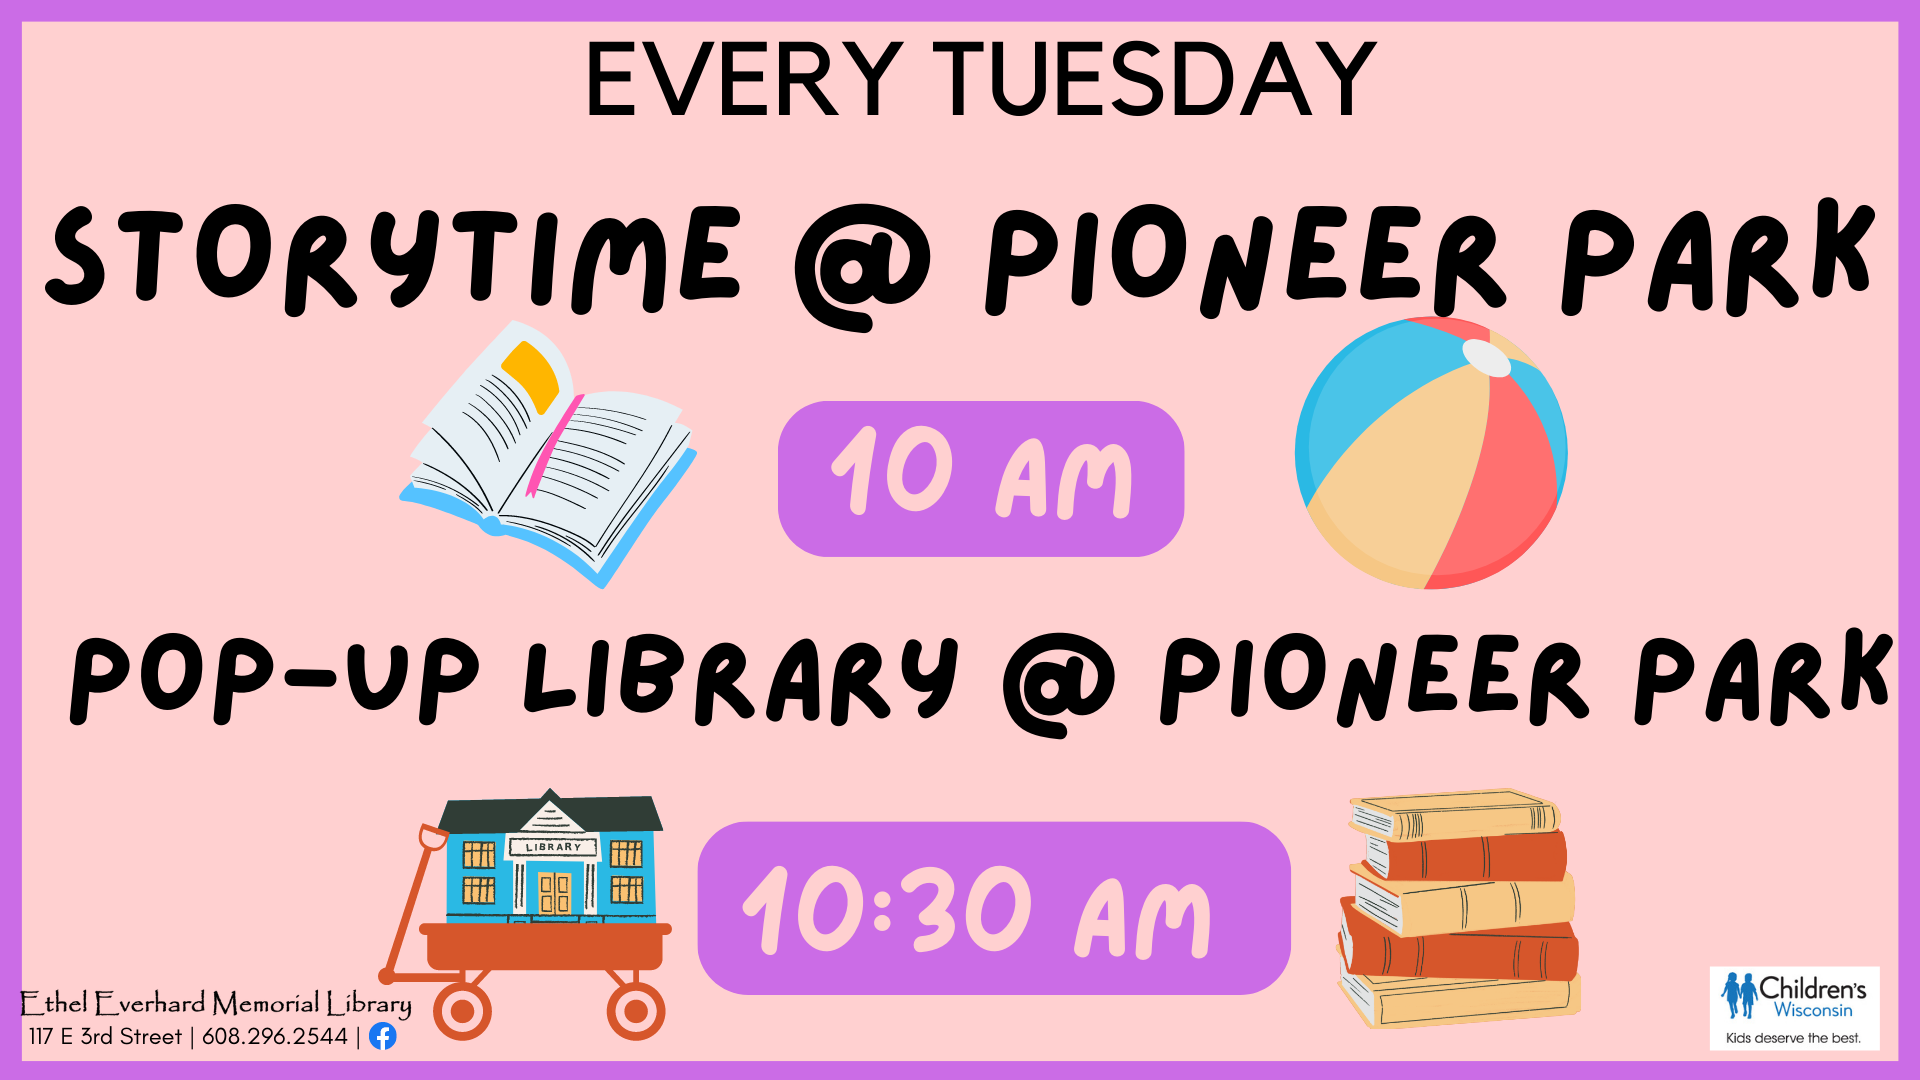 Storytime AND Pop-Up Library at Pioneer Park